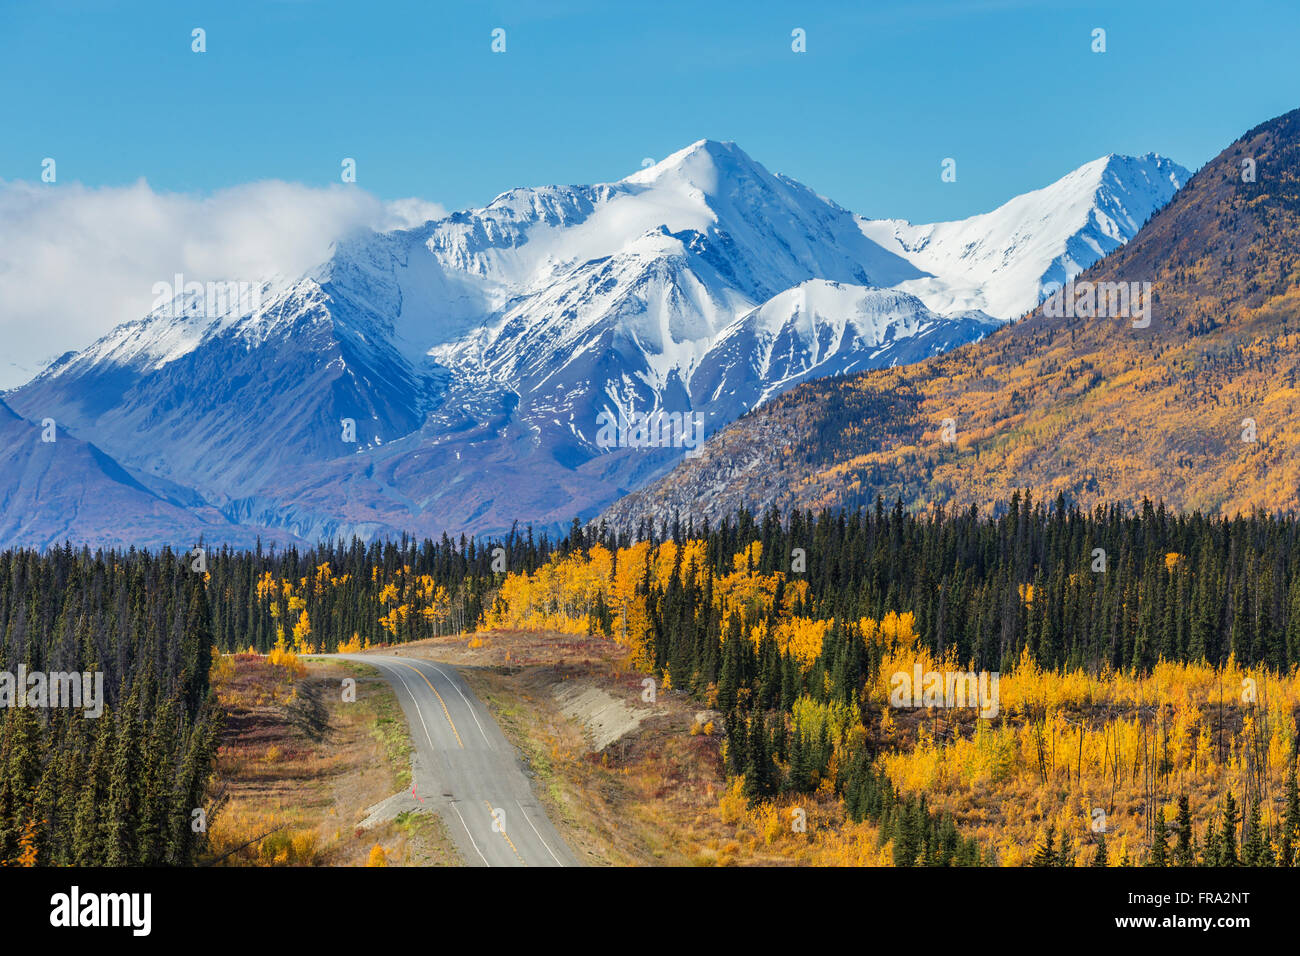 Scenic View Of The Alaska Highway With Snow Capped Peaks Of The St. Elias Mountains And Colorful Trees In The Background, Yukon Territory, Canada, ... Stock Photo